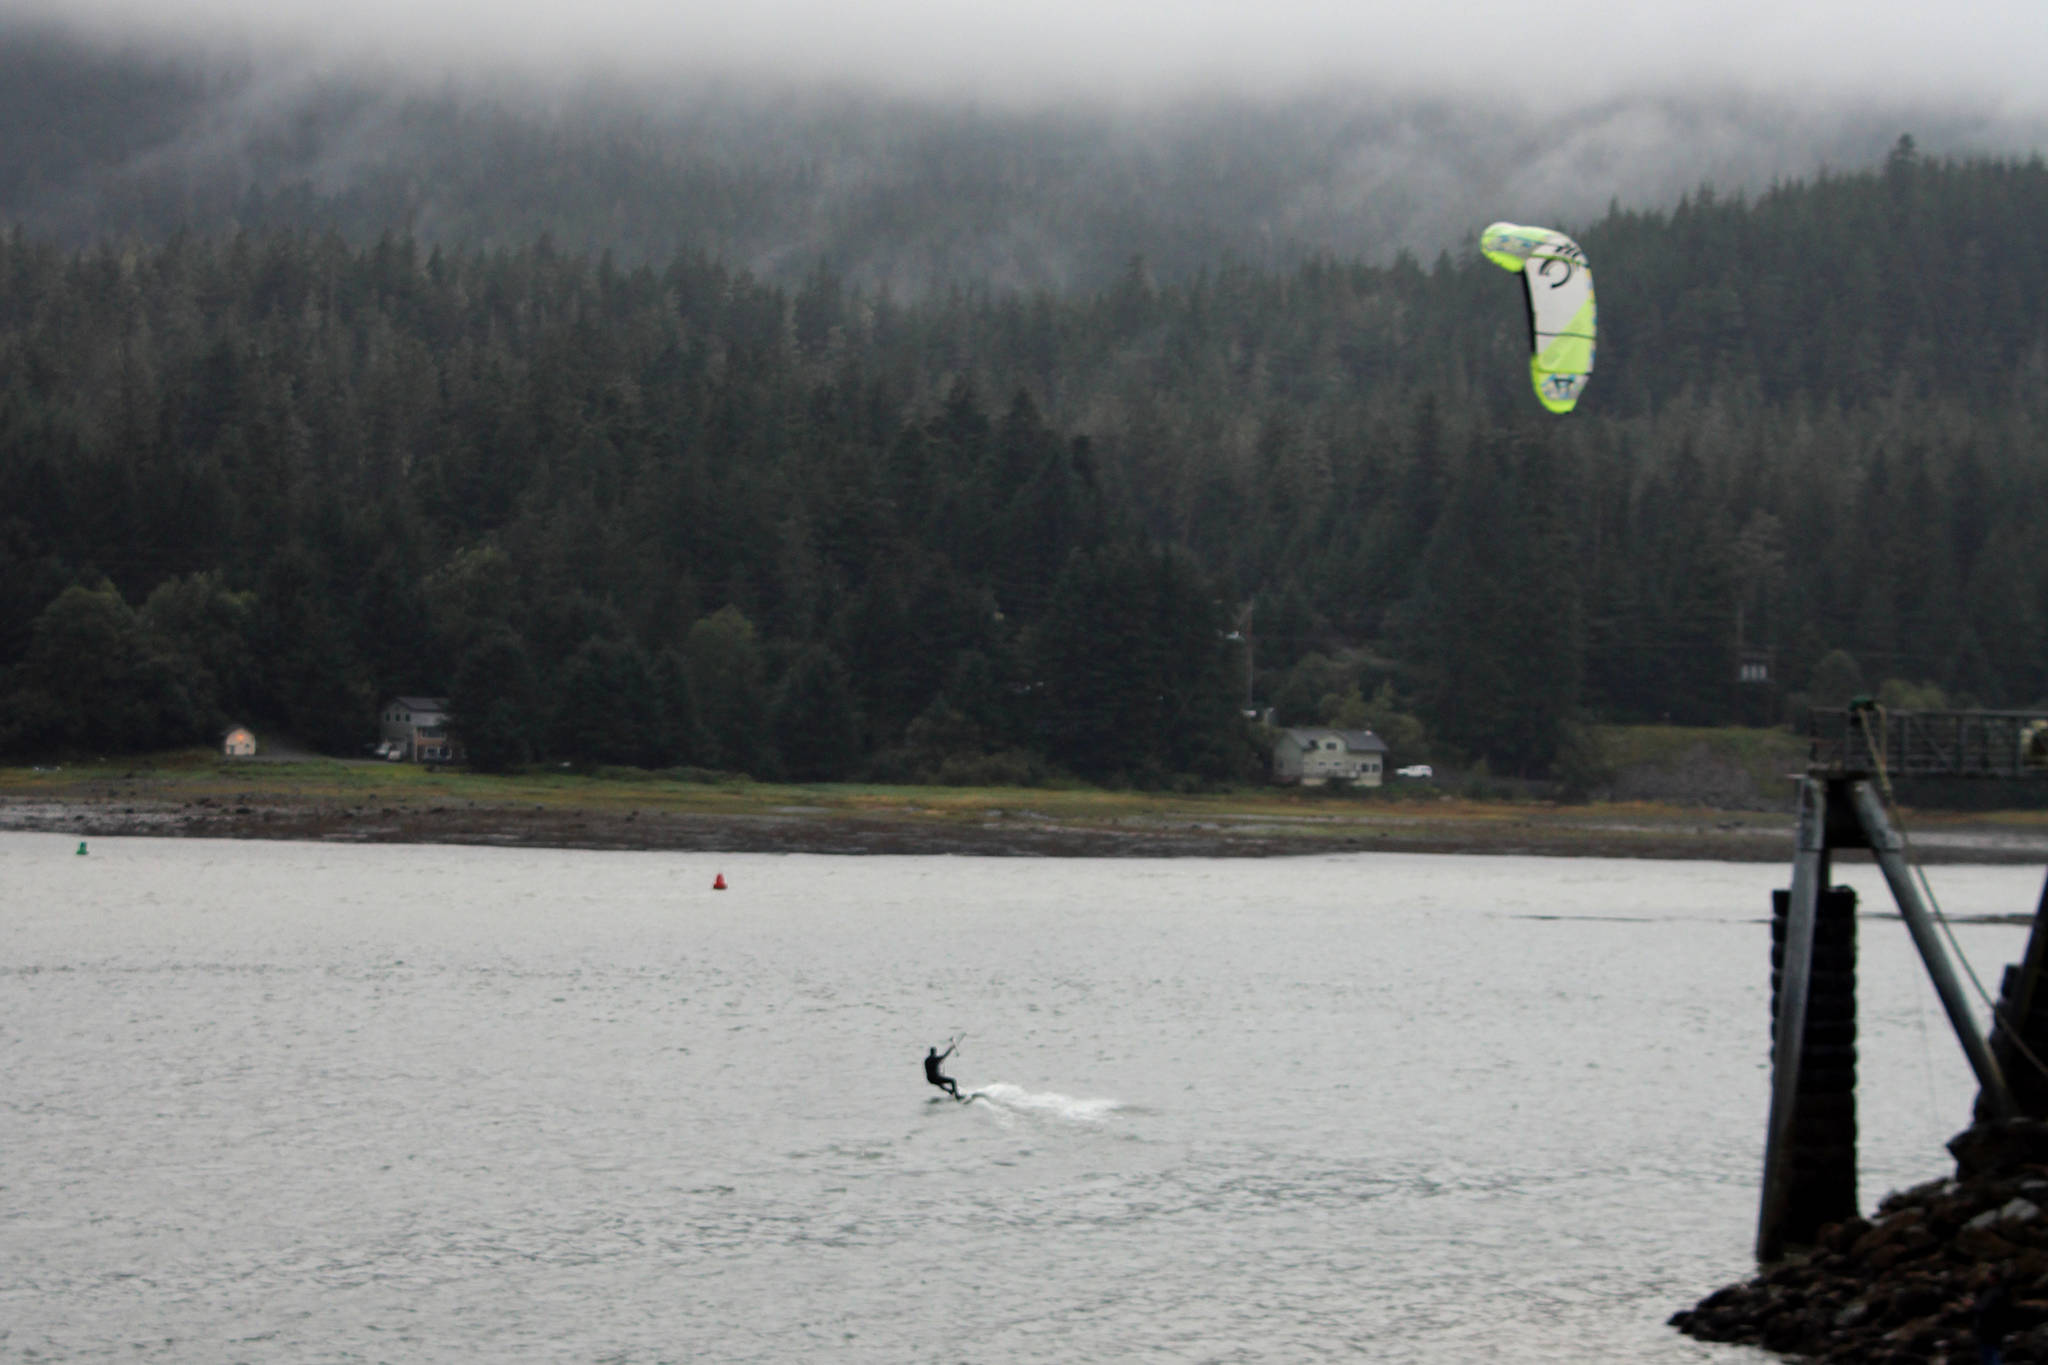 A kiteboarder practices their hobby in spite of dreary weather as Juneau’s third wettest summer on record comes to a damp end, Sept. 3, 2020. (Ben Hohenstatt / Juneau Empire)